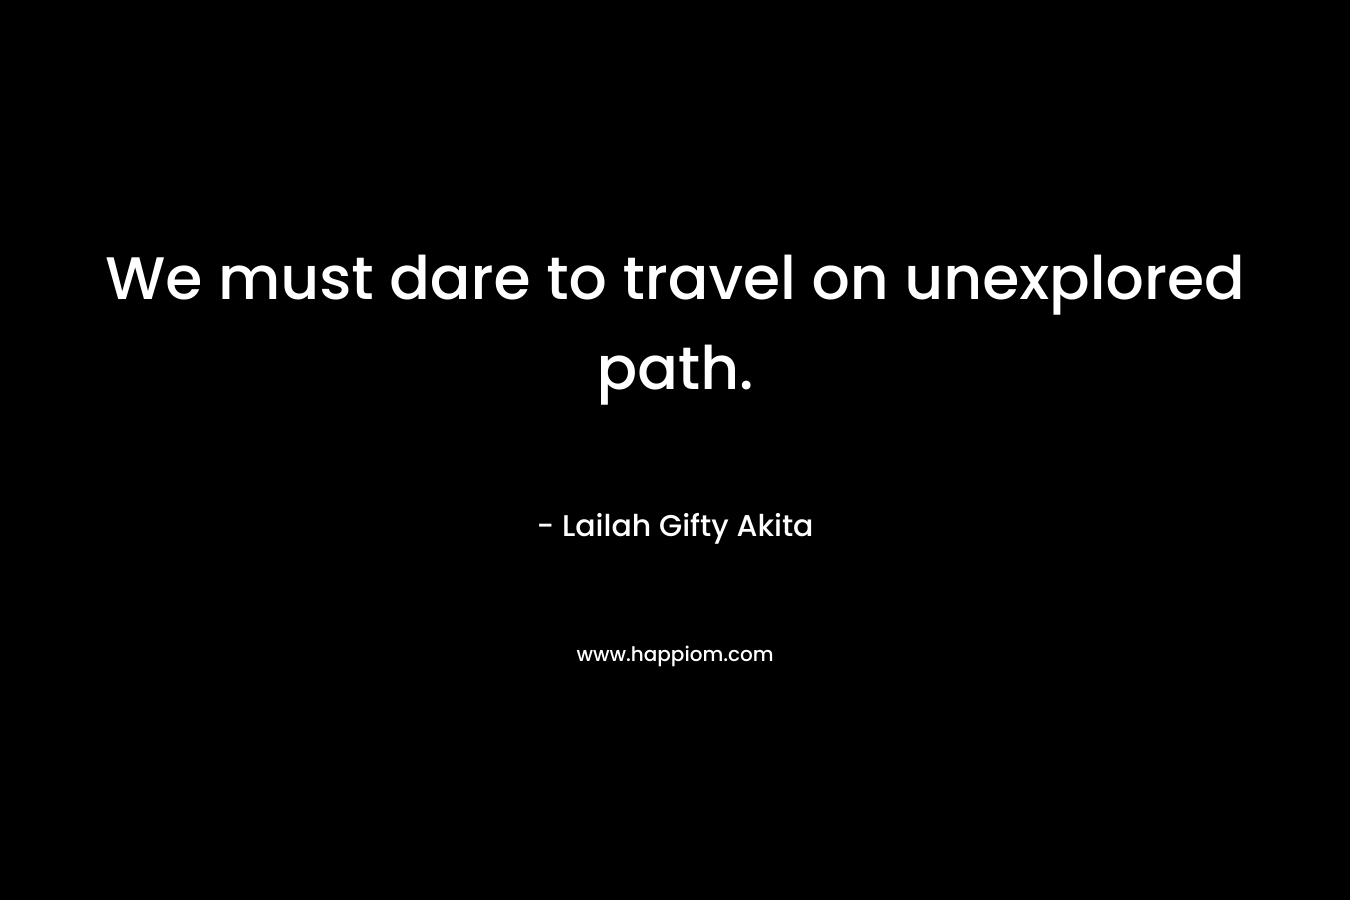 We must dare to travel on unexplored path.